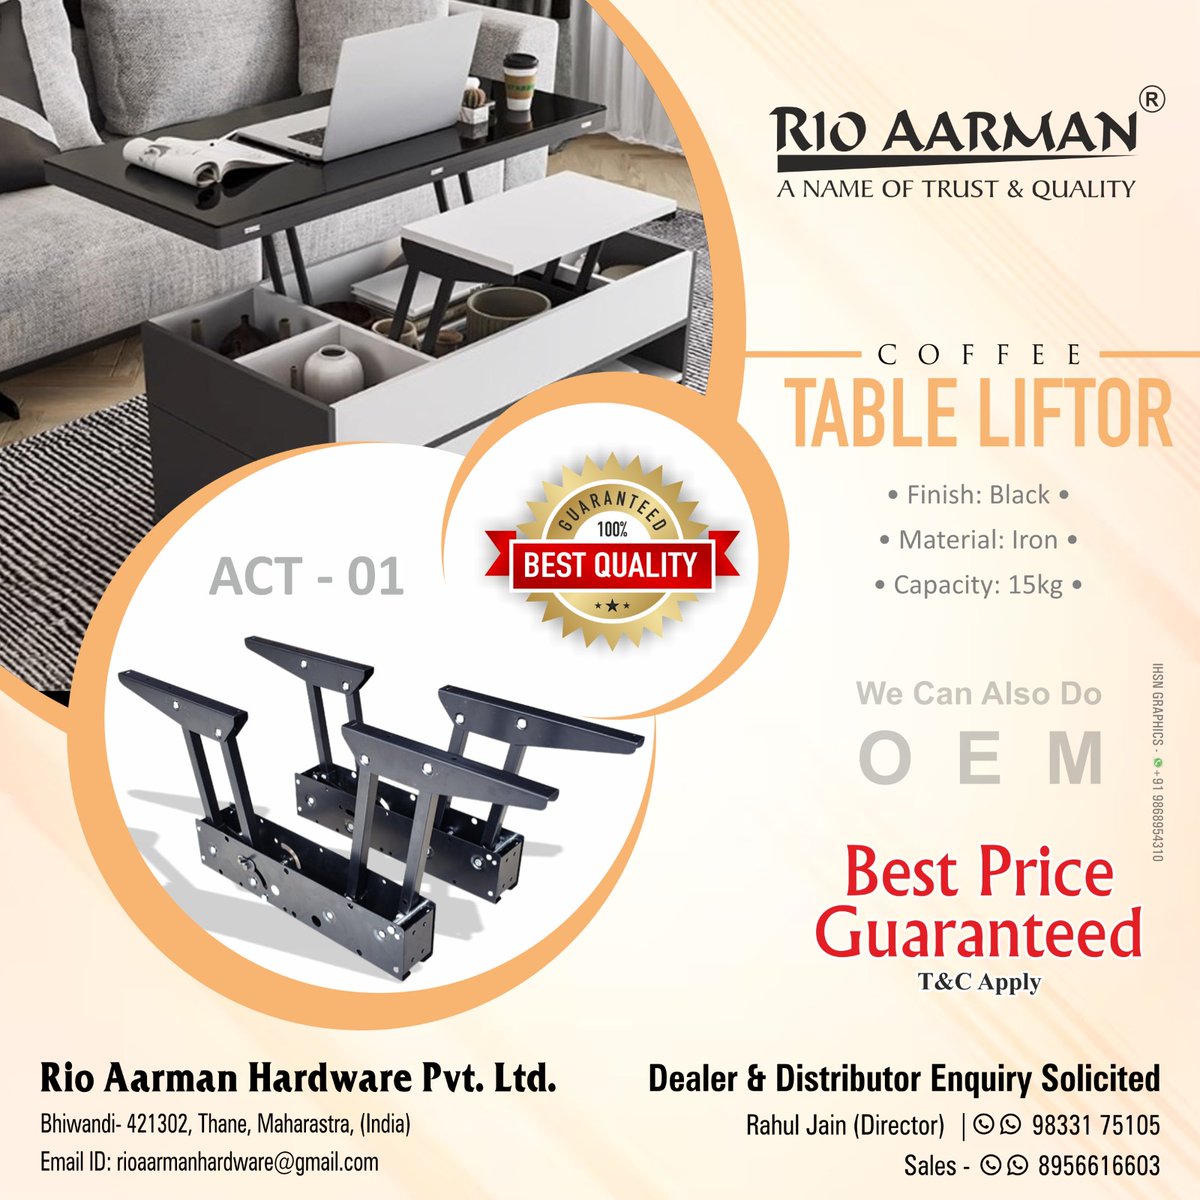 “𝐑𝐈𝐎 𝐀𝐀𝐑𝐌𝐀𝐍 𝐇𝐀𝐑𝐃𝐖𝐀𝐑𝐄' have best and powerful table lifter which will add more powers to your tables.

#rioaarmanhardware #Aaro #hardwarestore #AutoHinges #SlidingTrackRollers #Tendombox #hardware #OEM